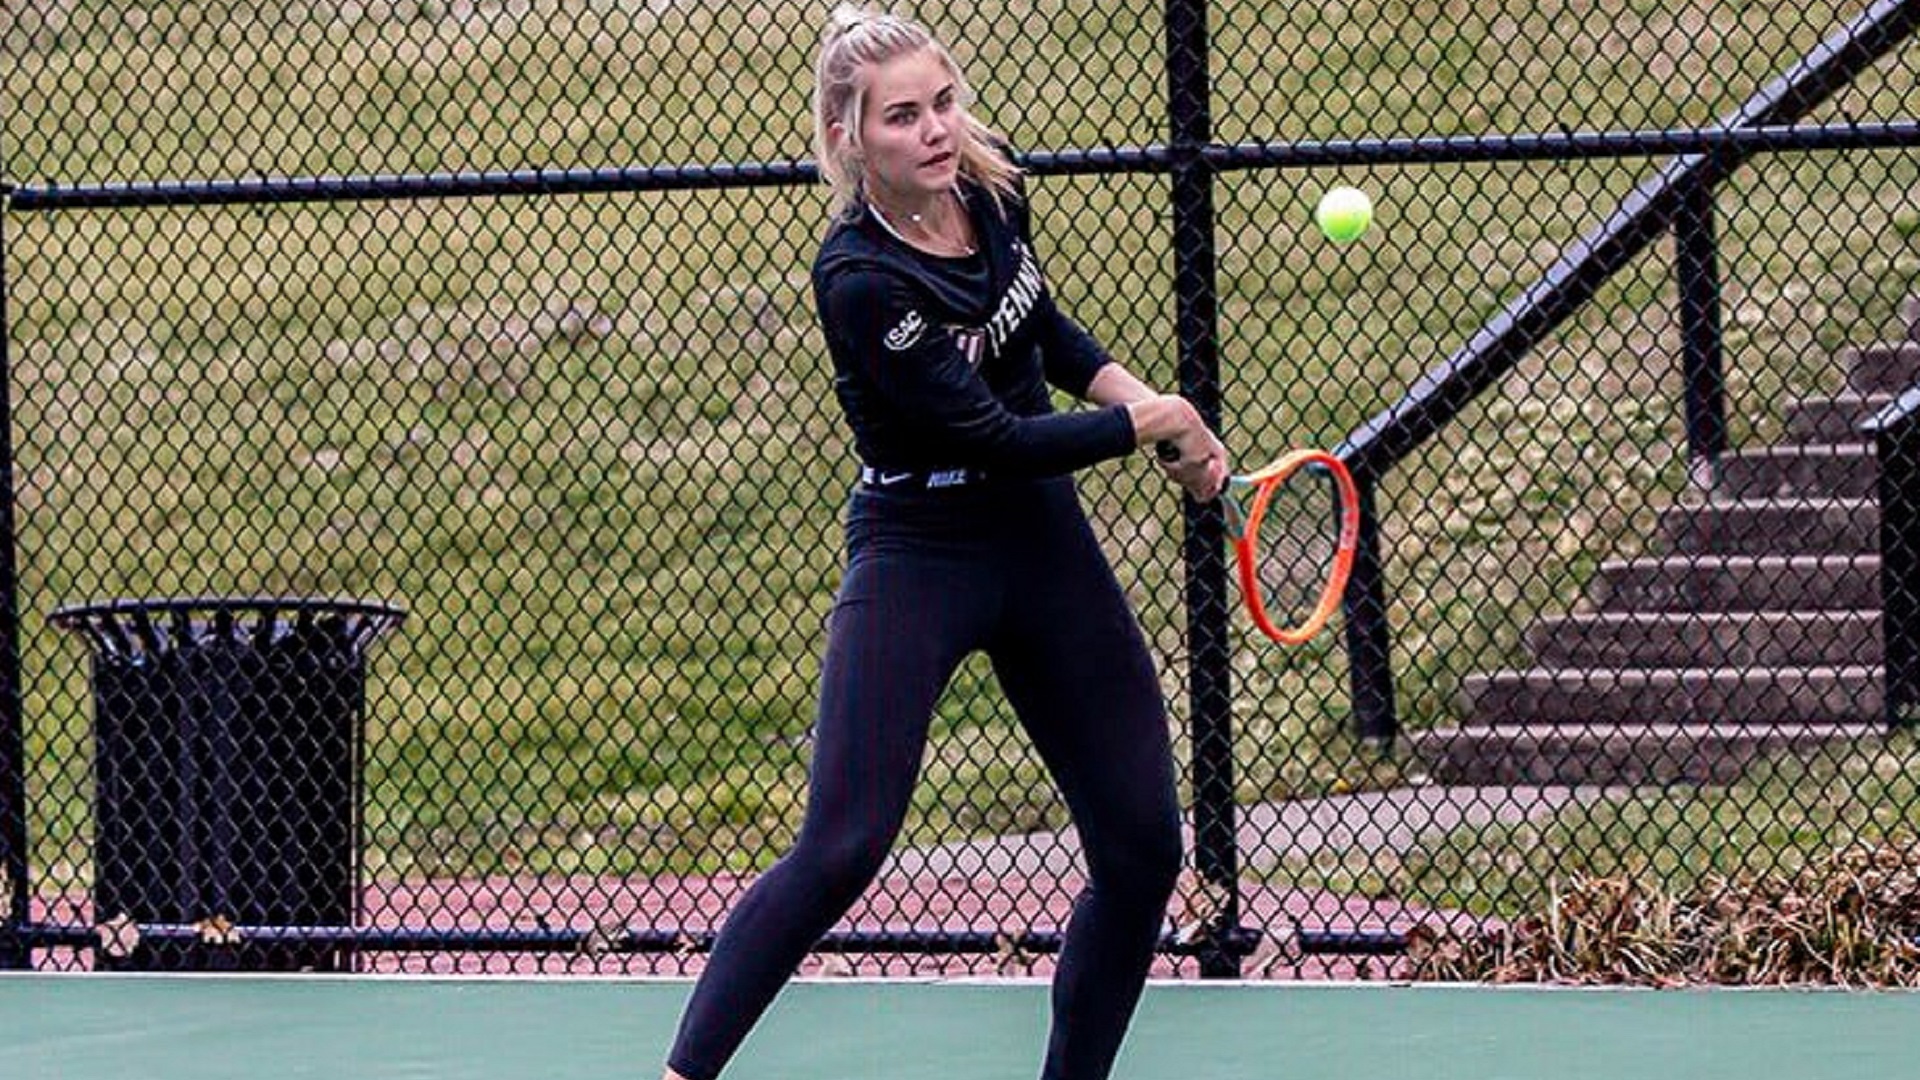 Singles sweep sends 11th-ranked Queens to 6-1 win over Tusculum